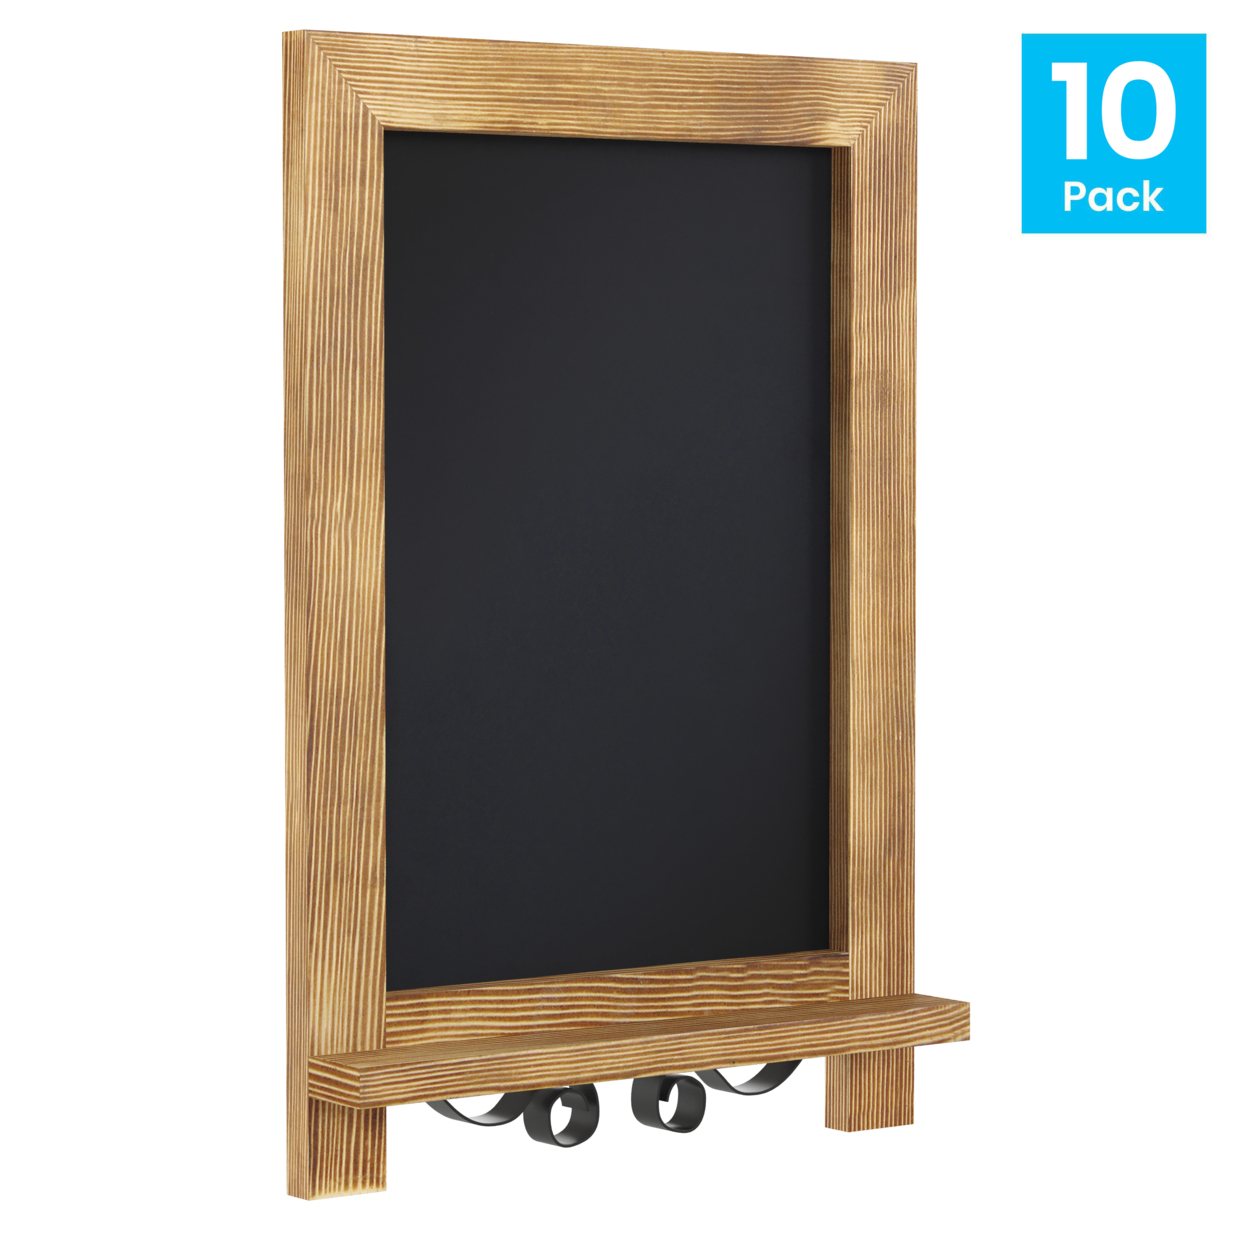 Magnetic Chalkboard With Scrolled Metal Legs, Set Of 10, Torched Brown Wood